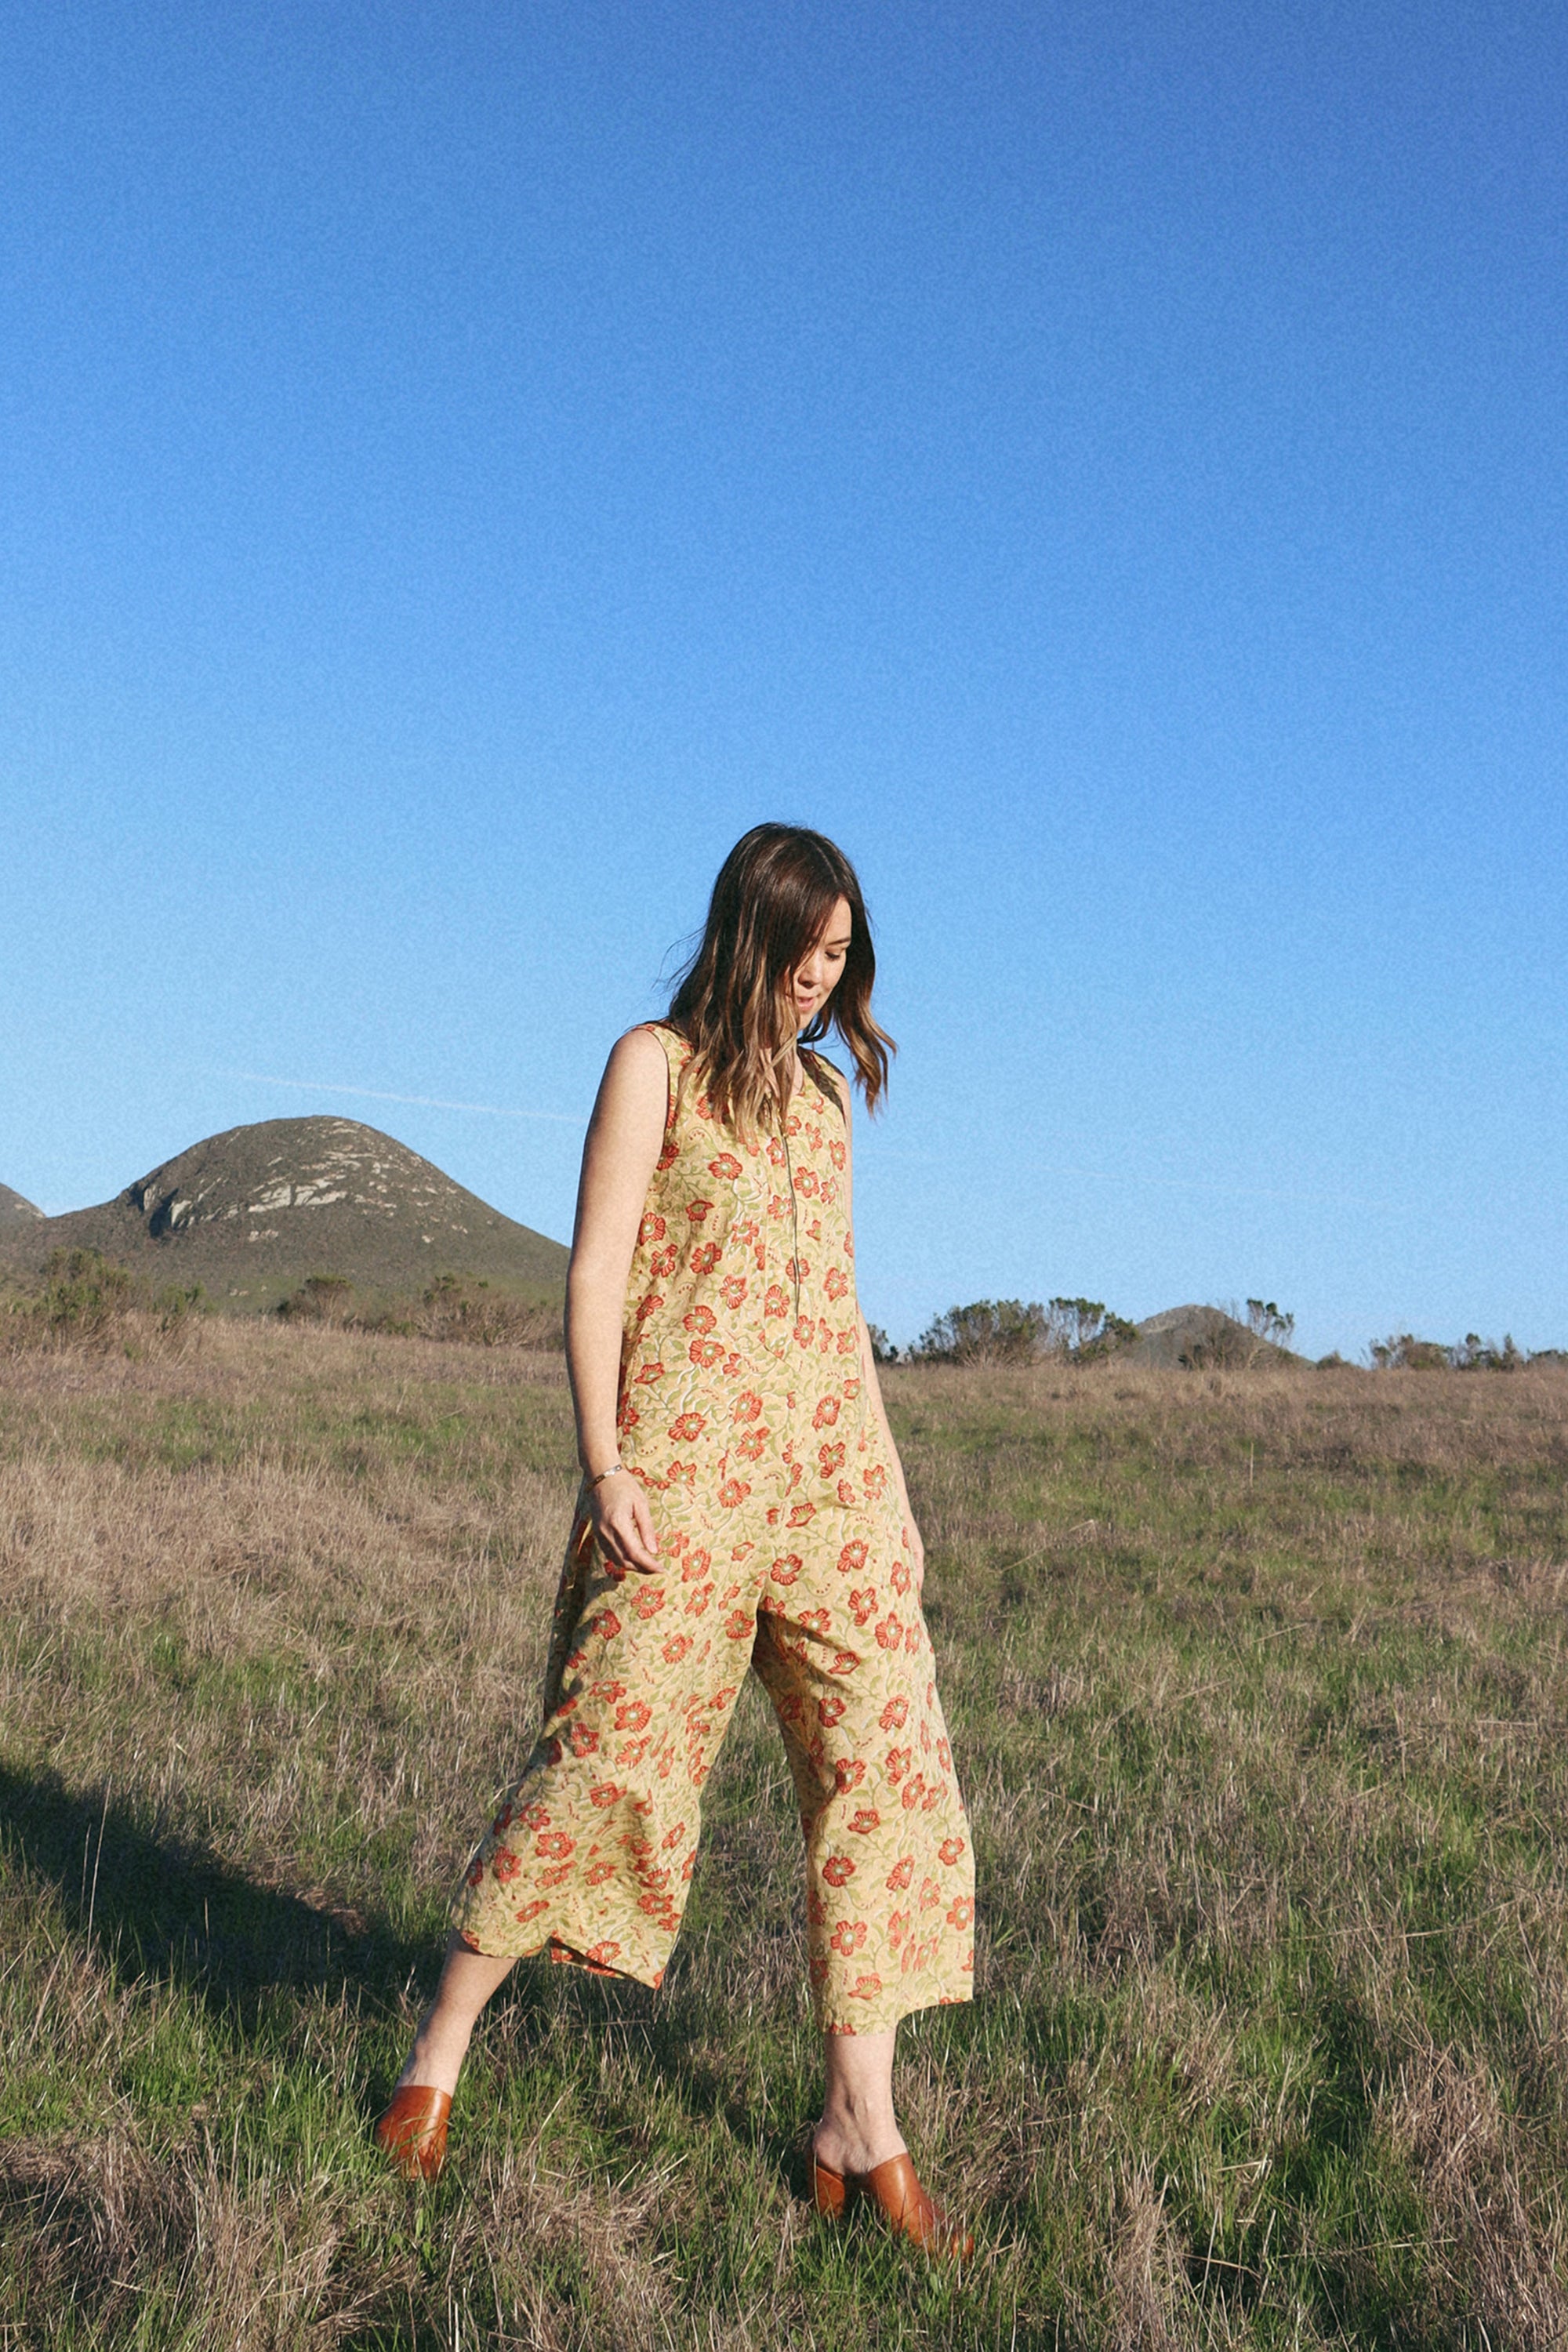 Woman wearing our new block printed floral print cotton sleeveless jumpsuit outside with hills in the background